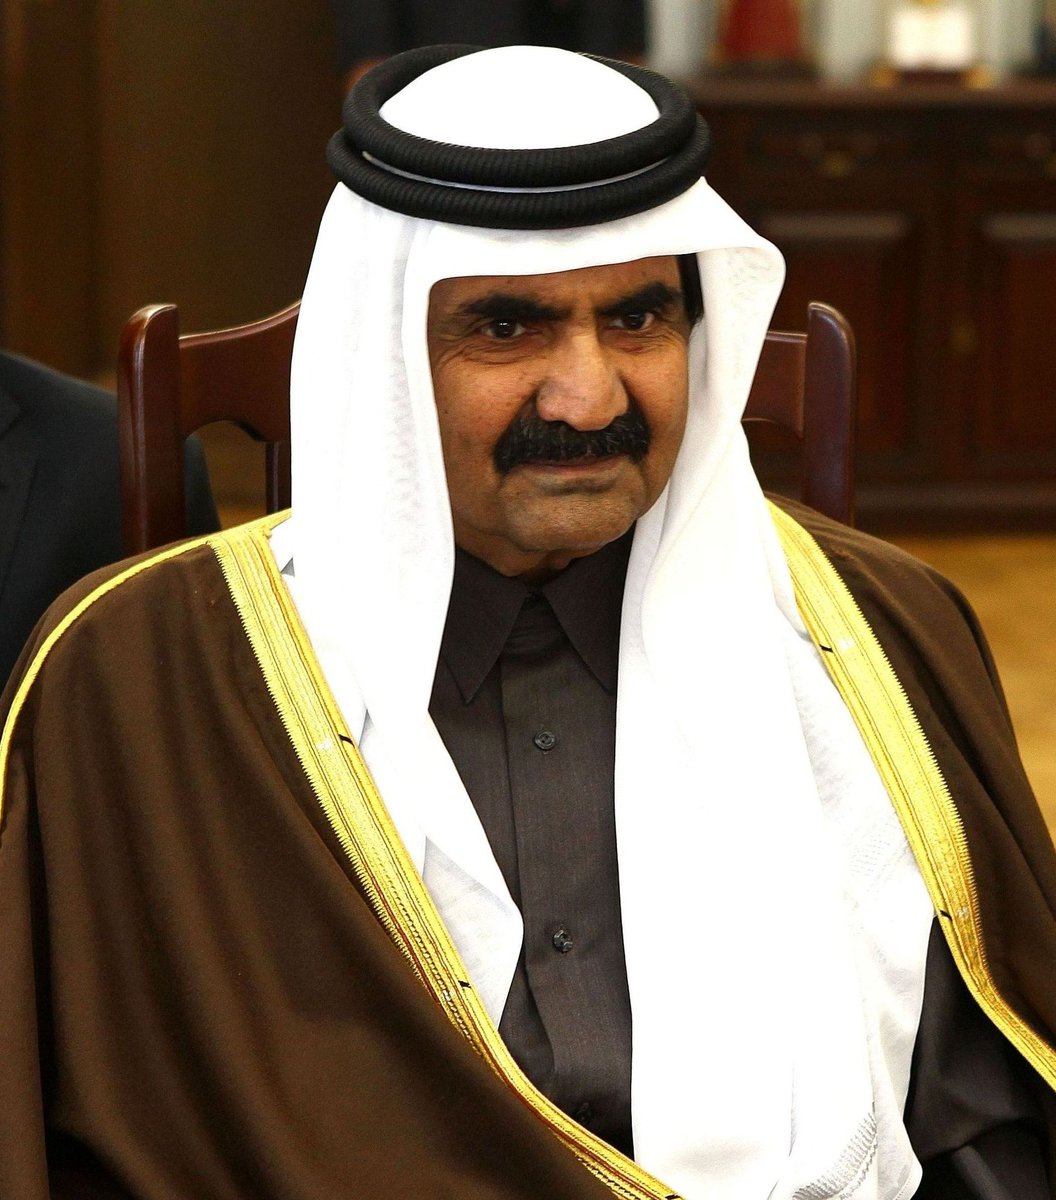 Since Hamad Bin Khalifa assumed role in Qatar a huge spike in terrorism around the Middle East and the world spiked, the Muslim Brotherhood association with the Qatari regime helped accelerate the MB plans thanks to the limitless funds by Qatar